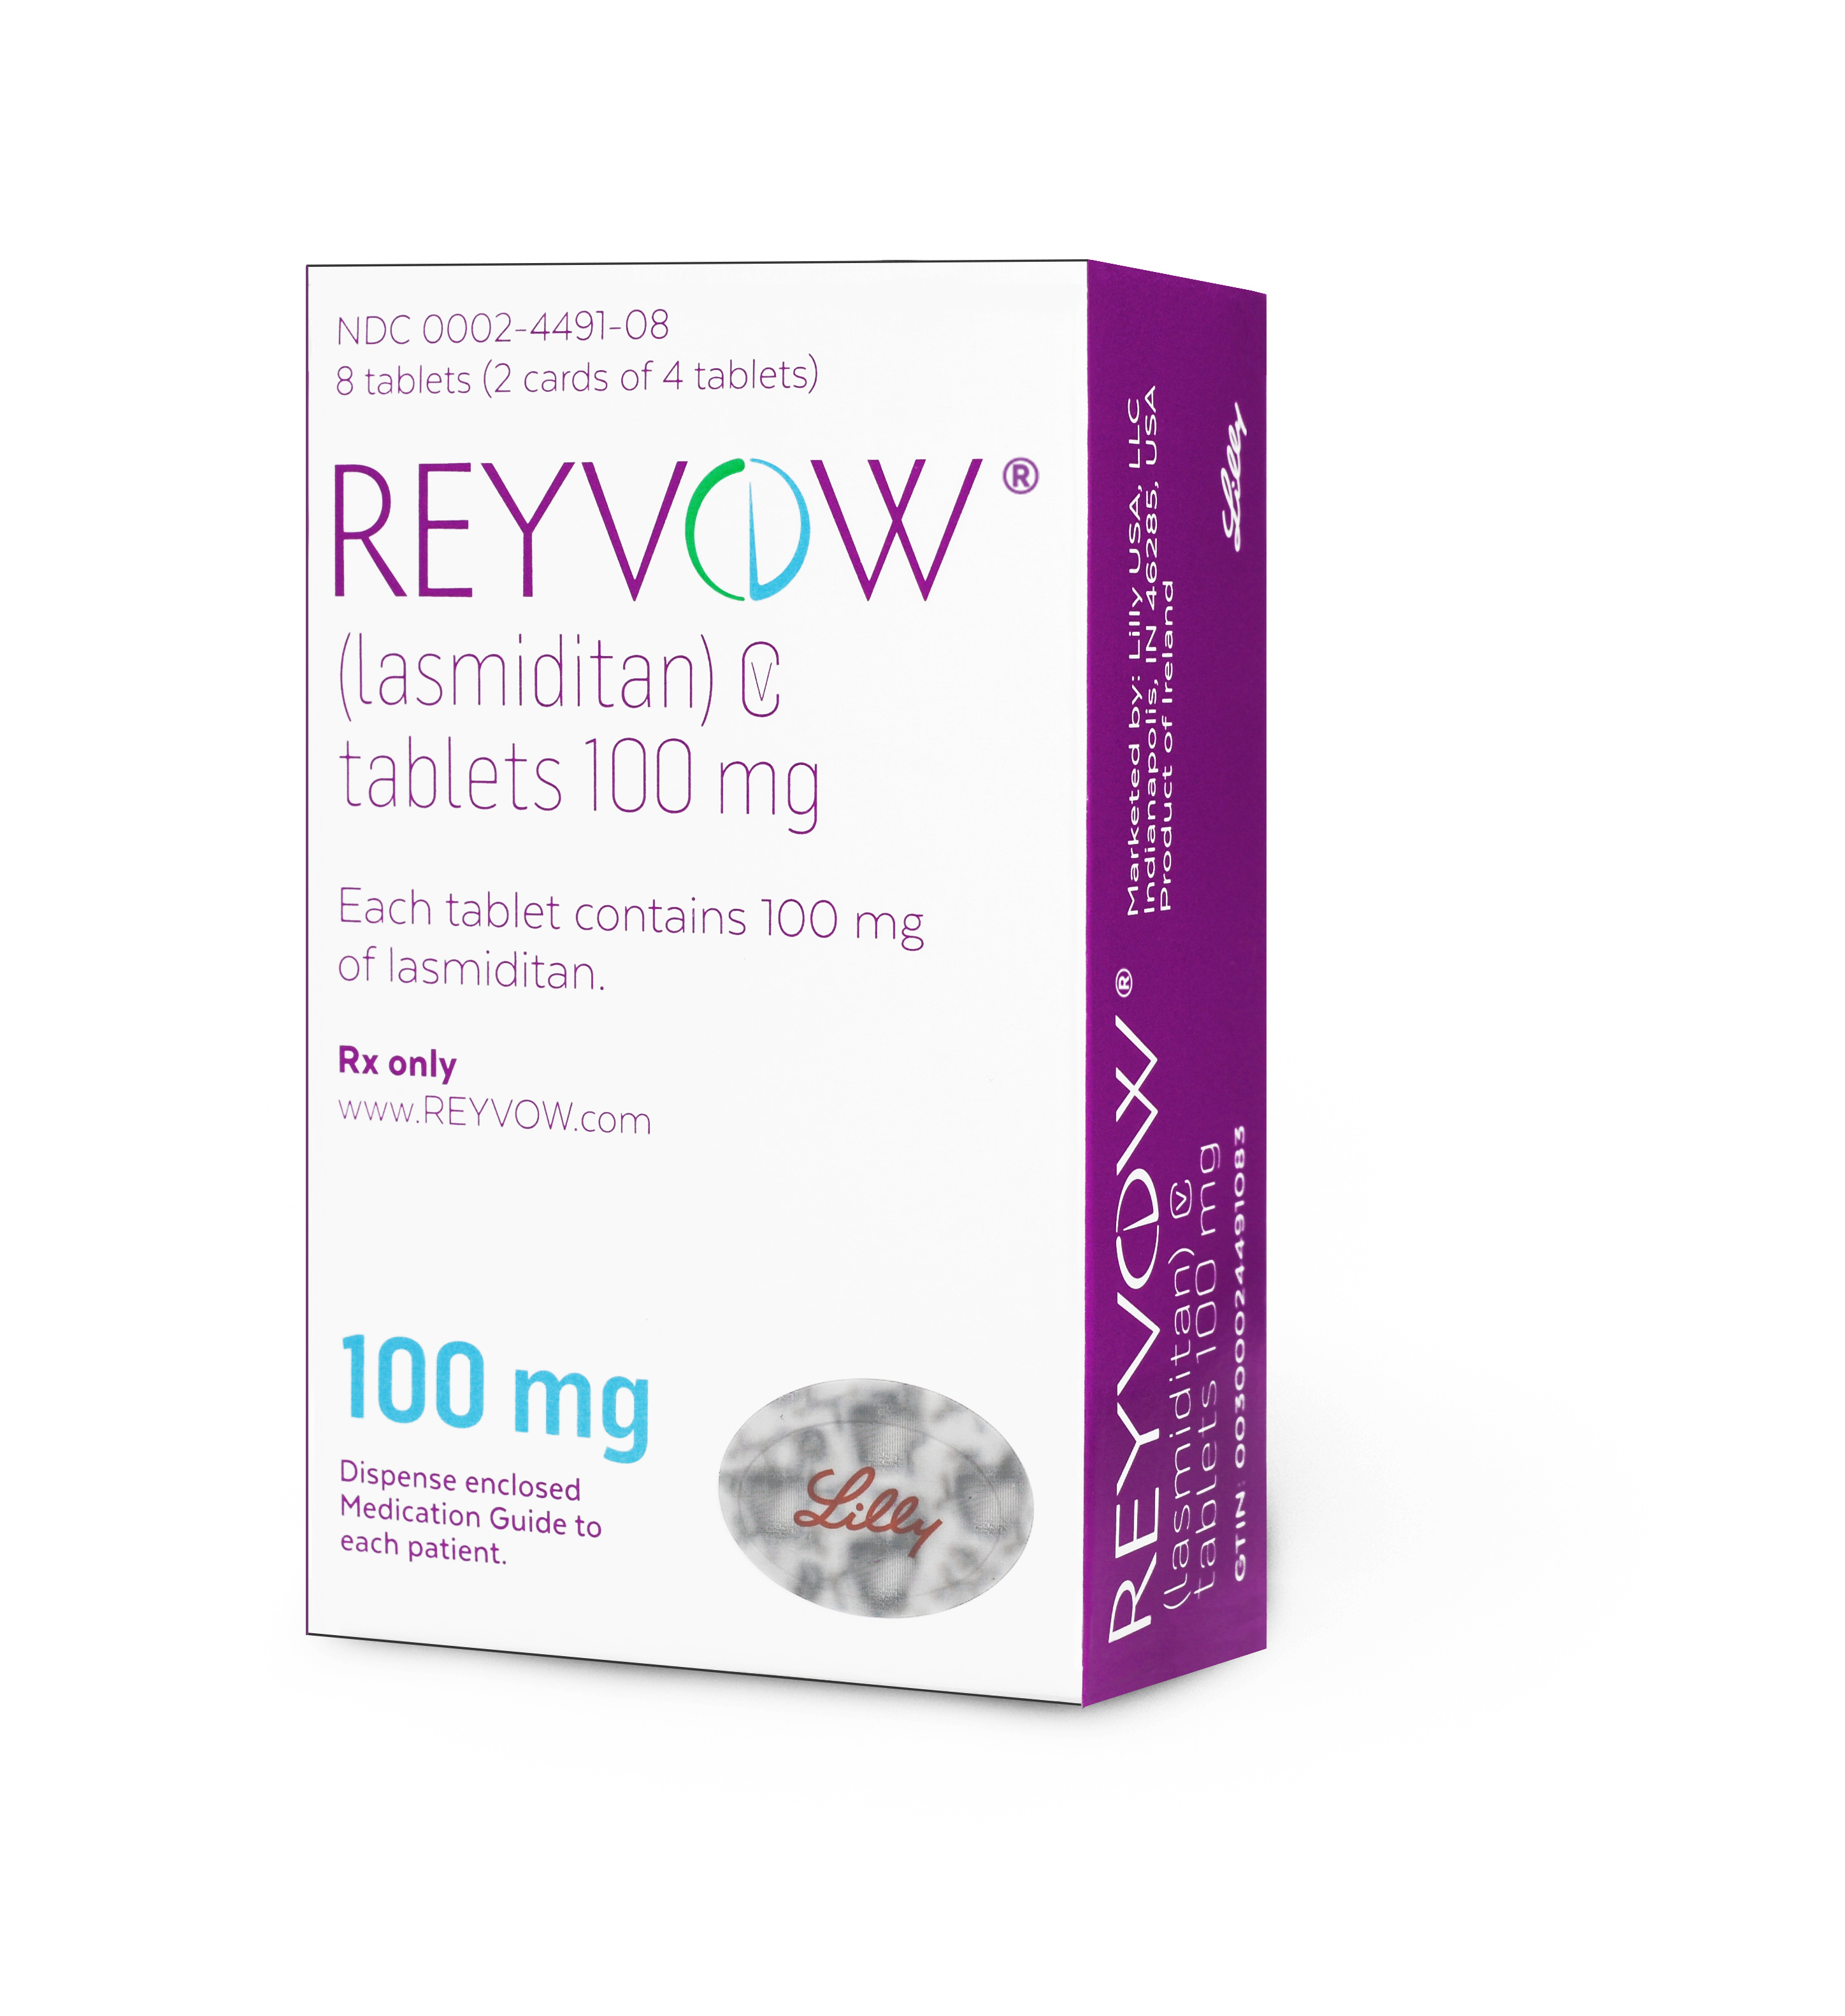 REYVOW product image